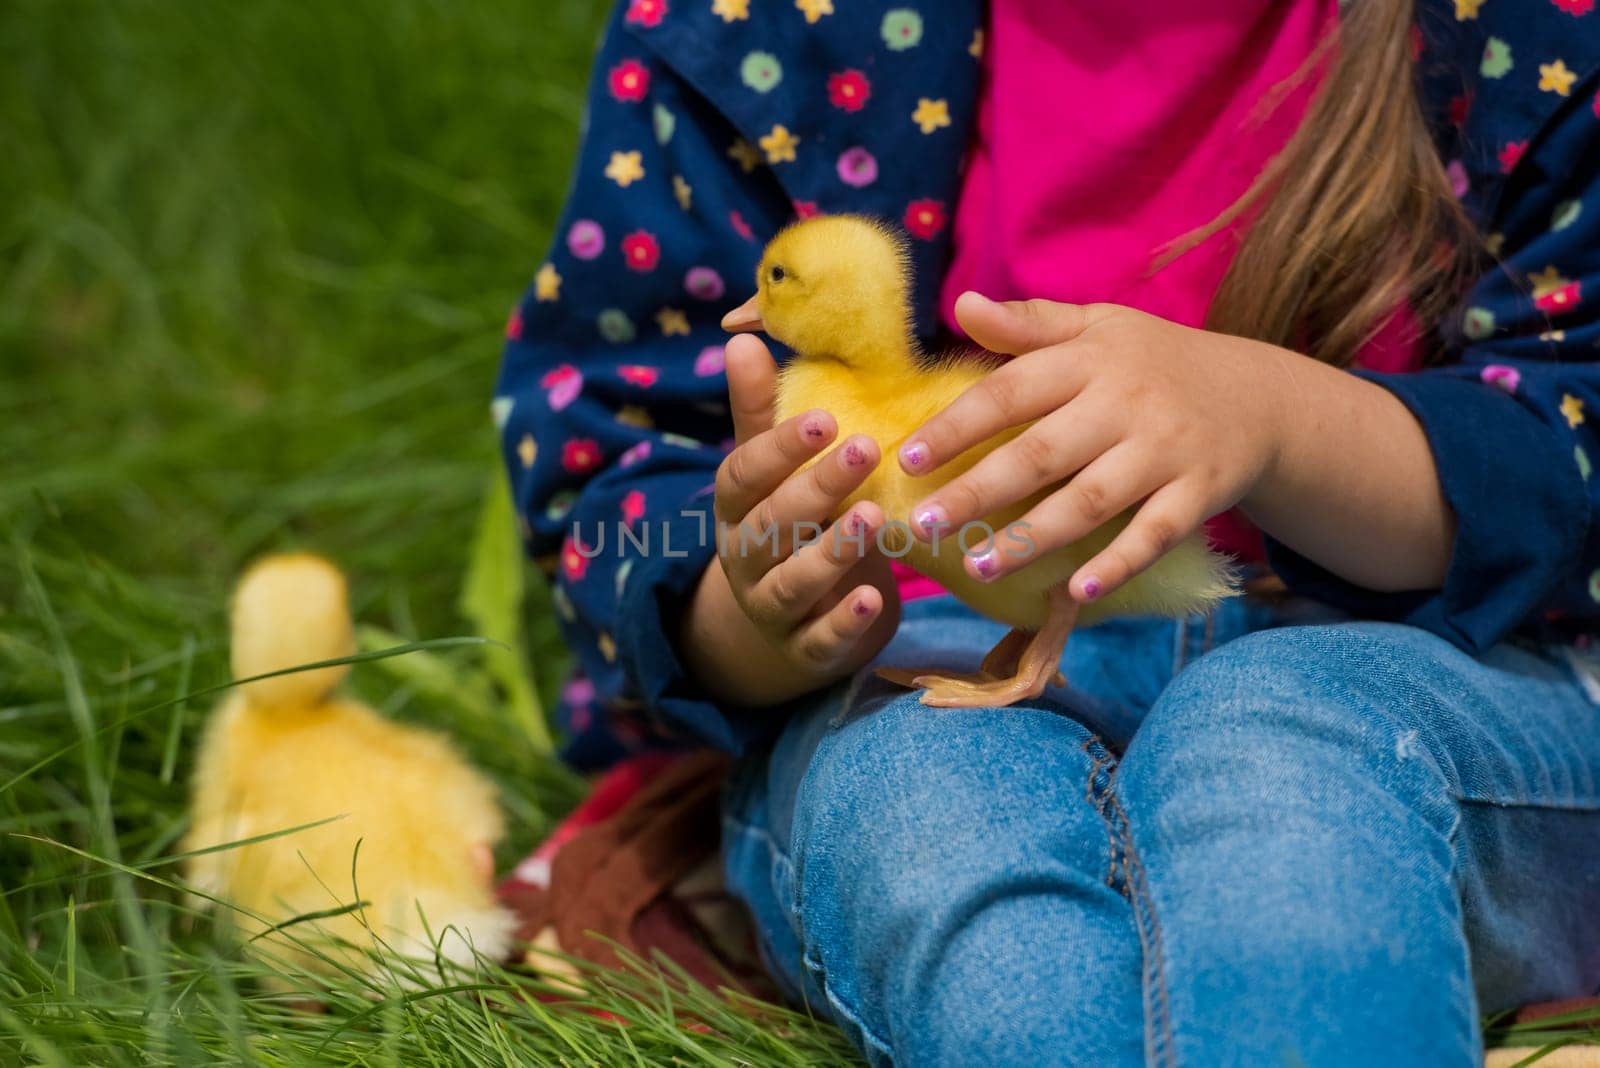 Little girl holding small ducklings in the garden. Close-up. Yellow duckling in her hands.